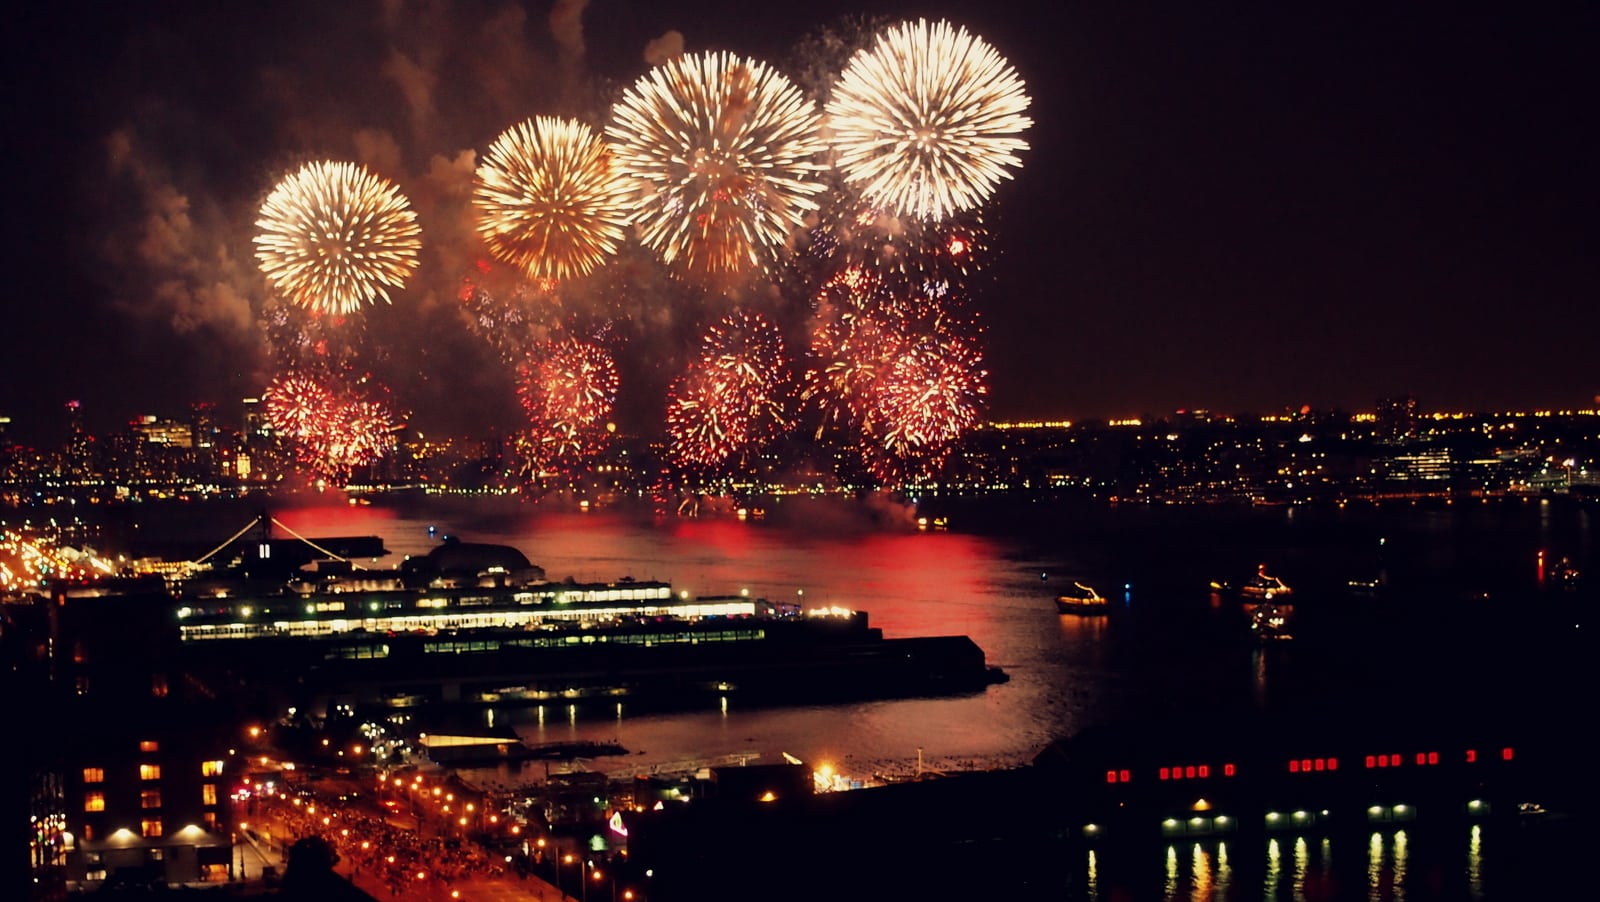 July 4th fireworks over the Hudson River, in New York City.